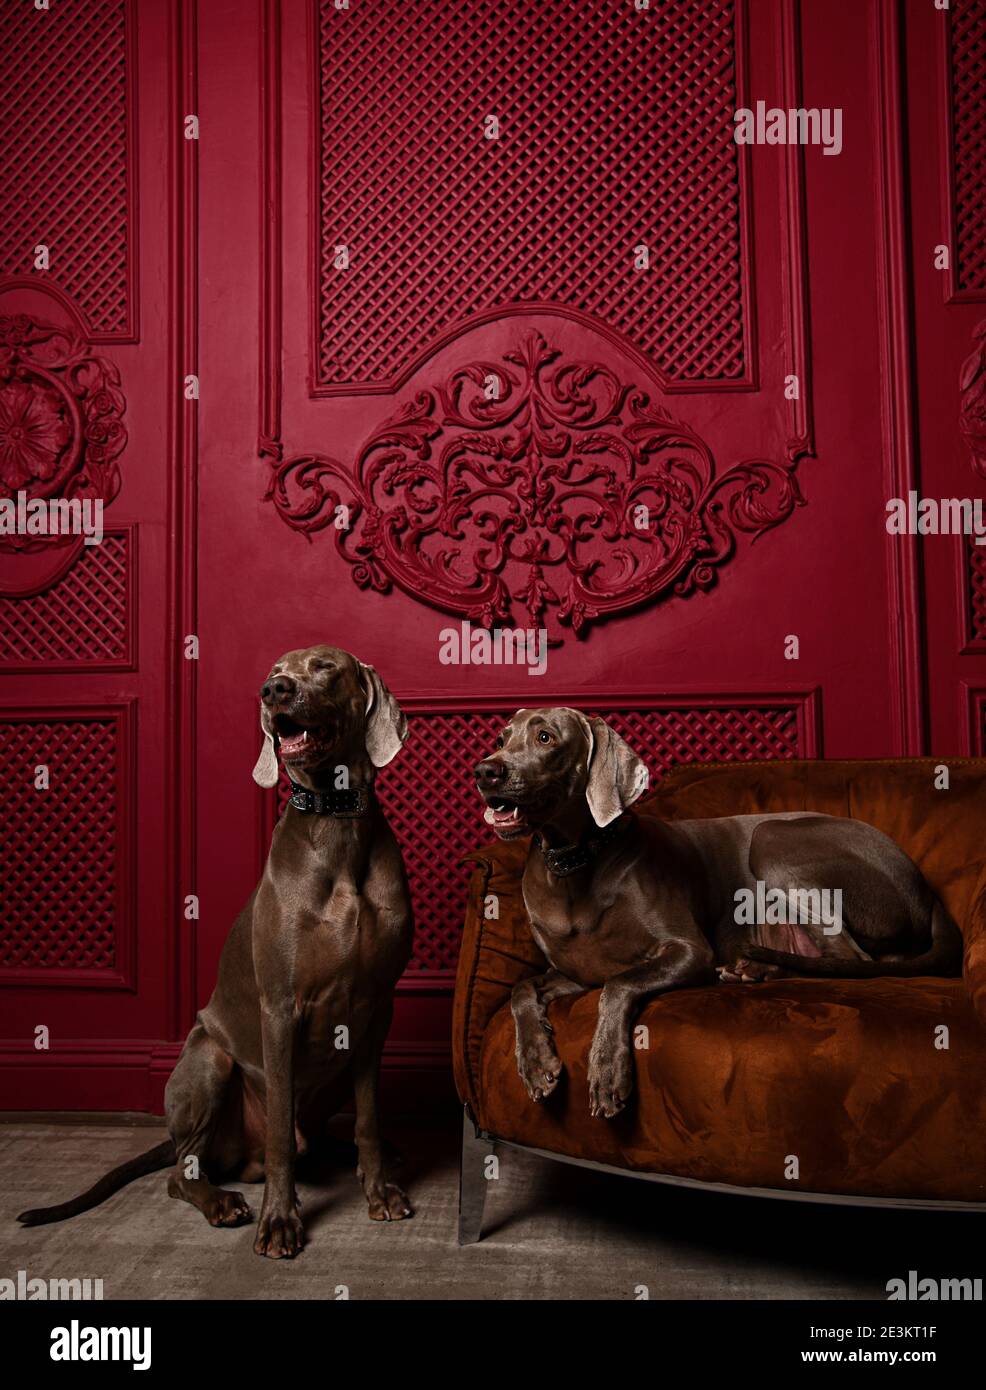 Two Beautiful grey brown Weimaraner dogs sitting in luxury red interior one dog lying on leather armchair  Stock Photo